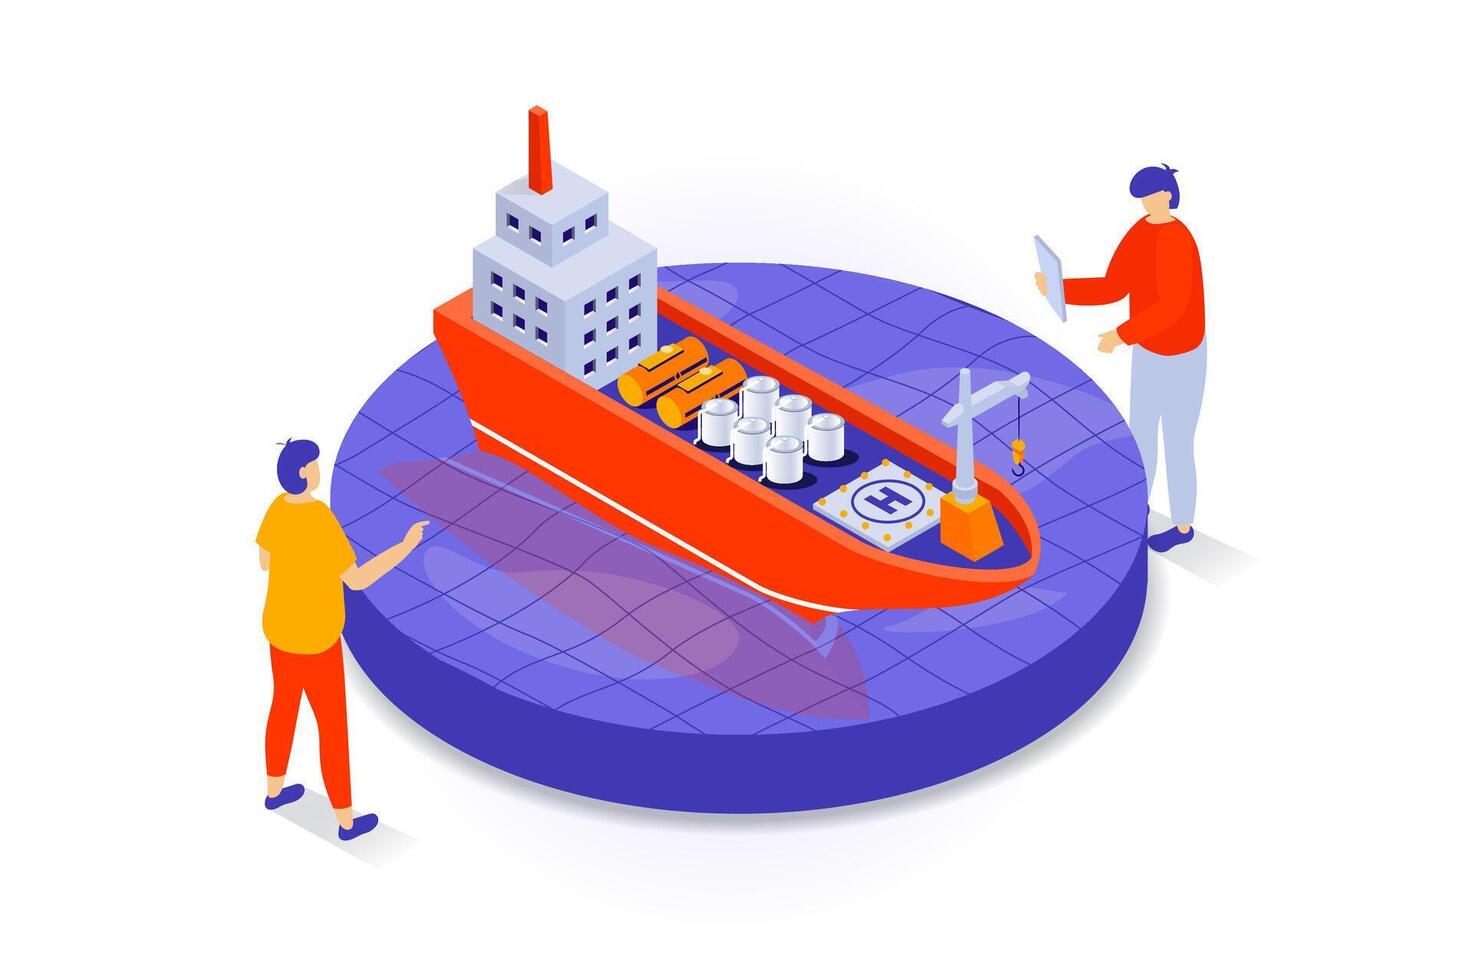 Oil industry concept in 3d isometric design. People selling petroleum products using tanker ship for cargo transportation to global market. Vector illustration with isometry scene for web graphic